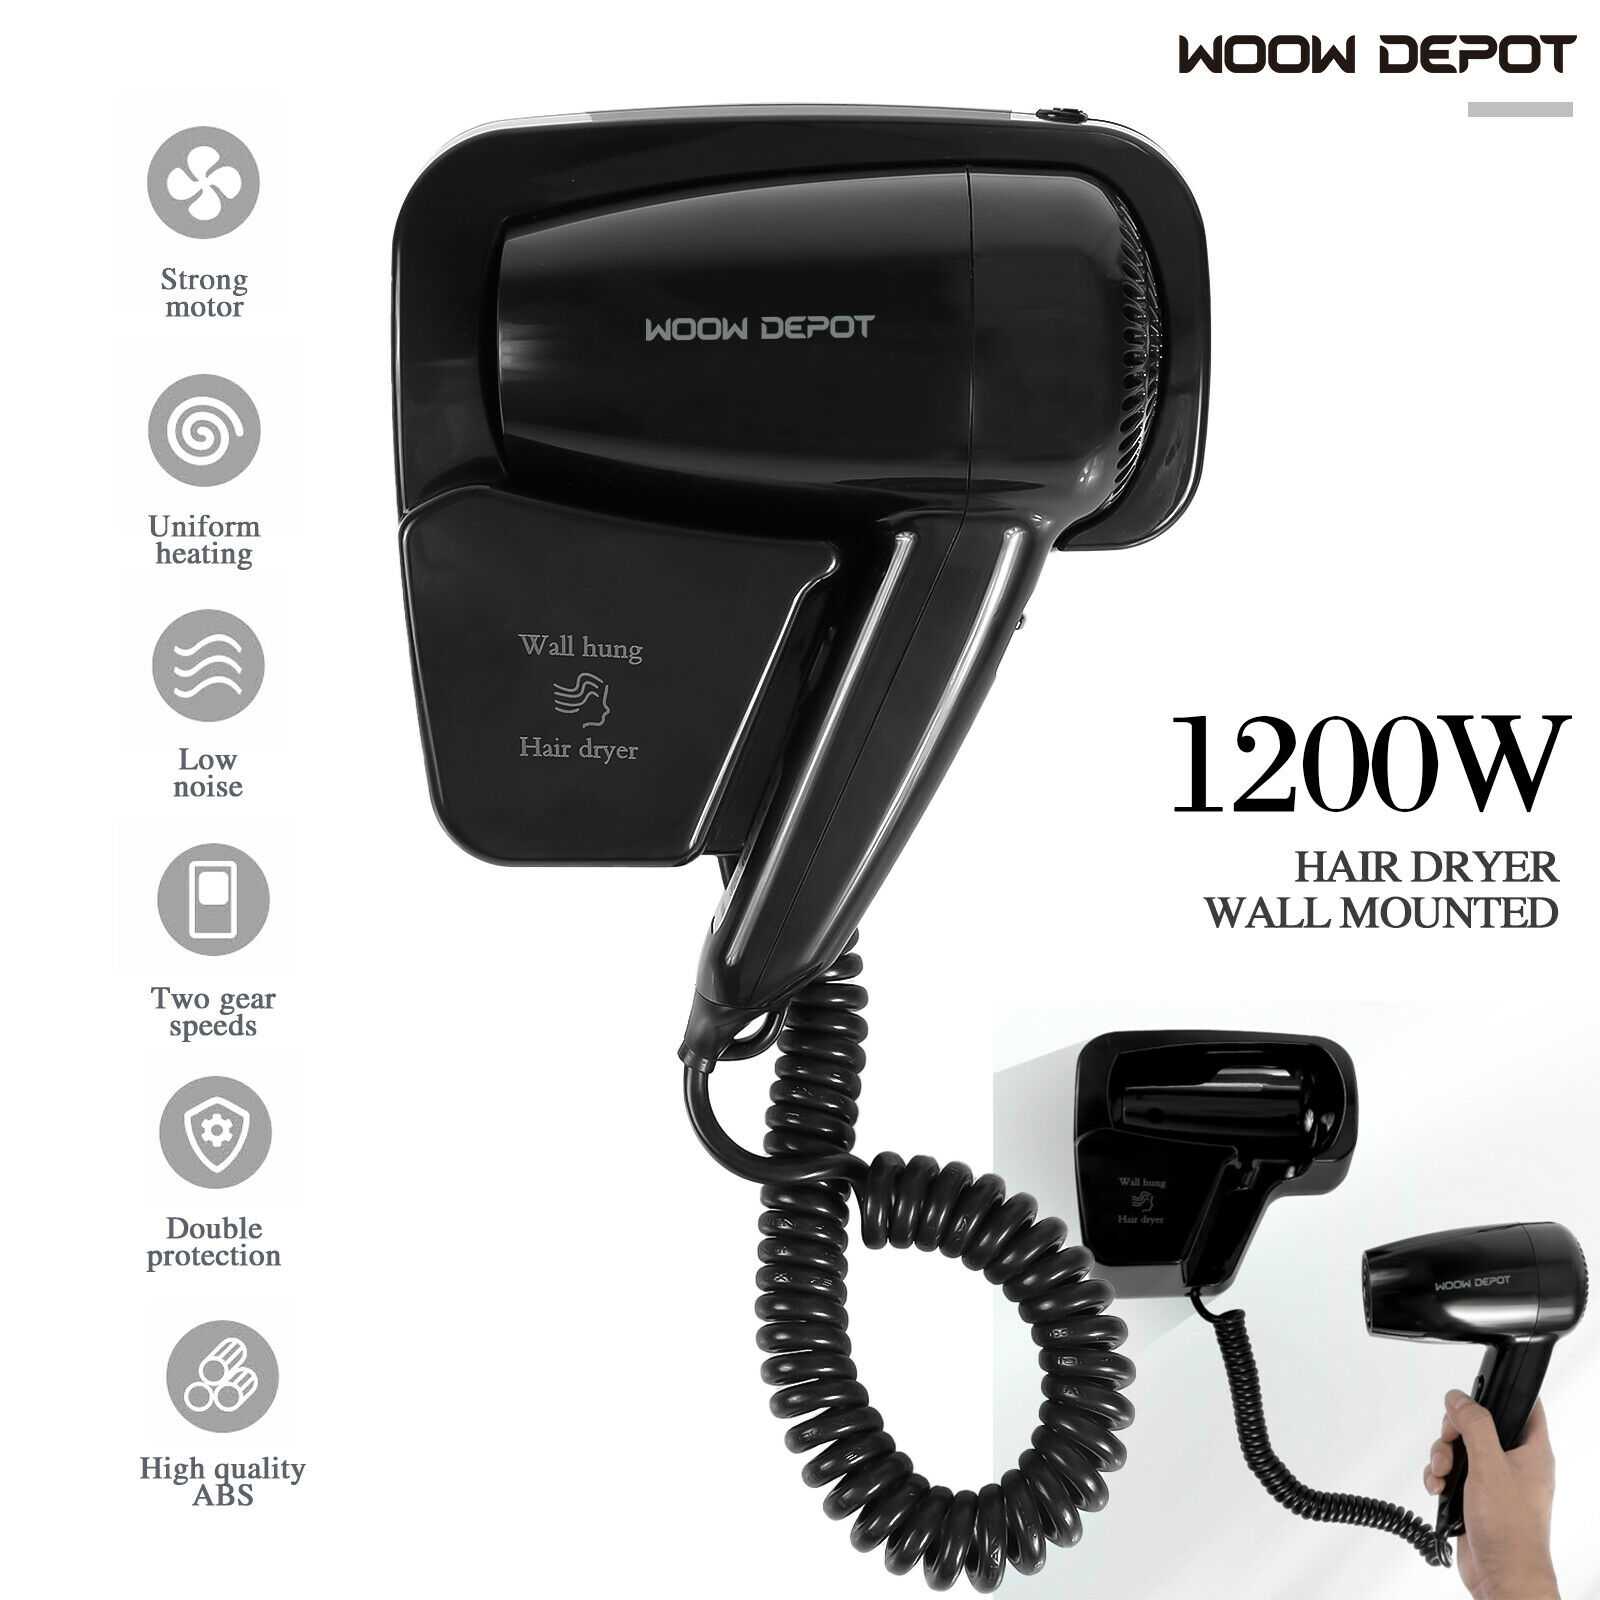 Durable Black Wall Mounted Hairdryer